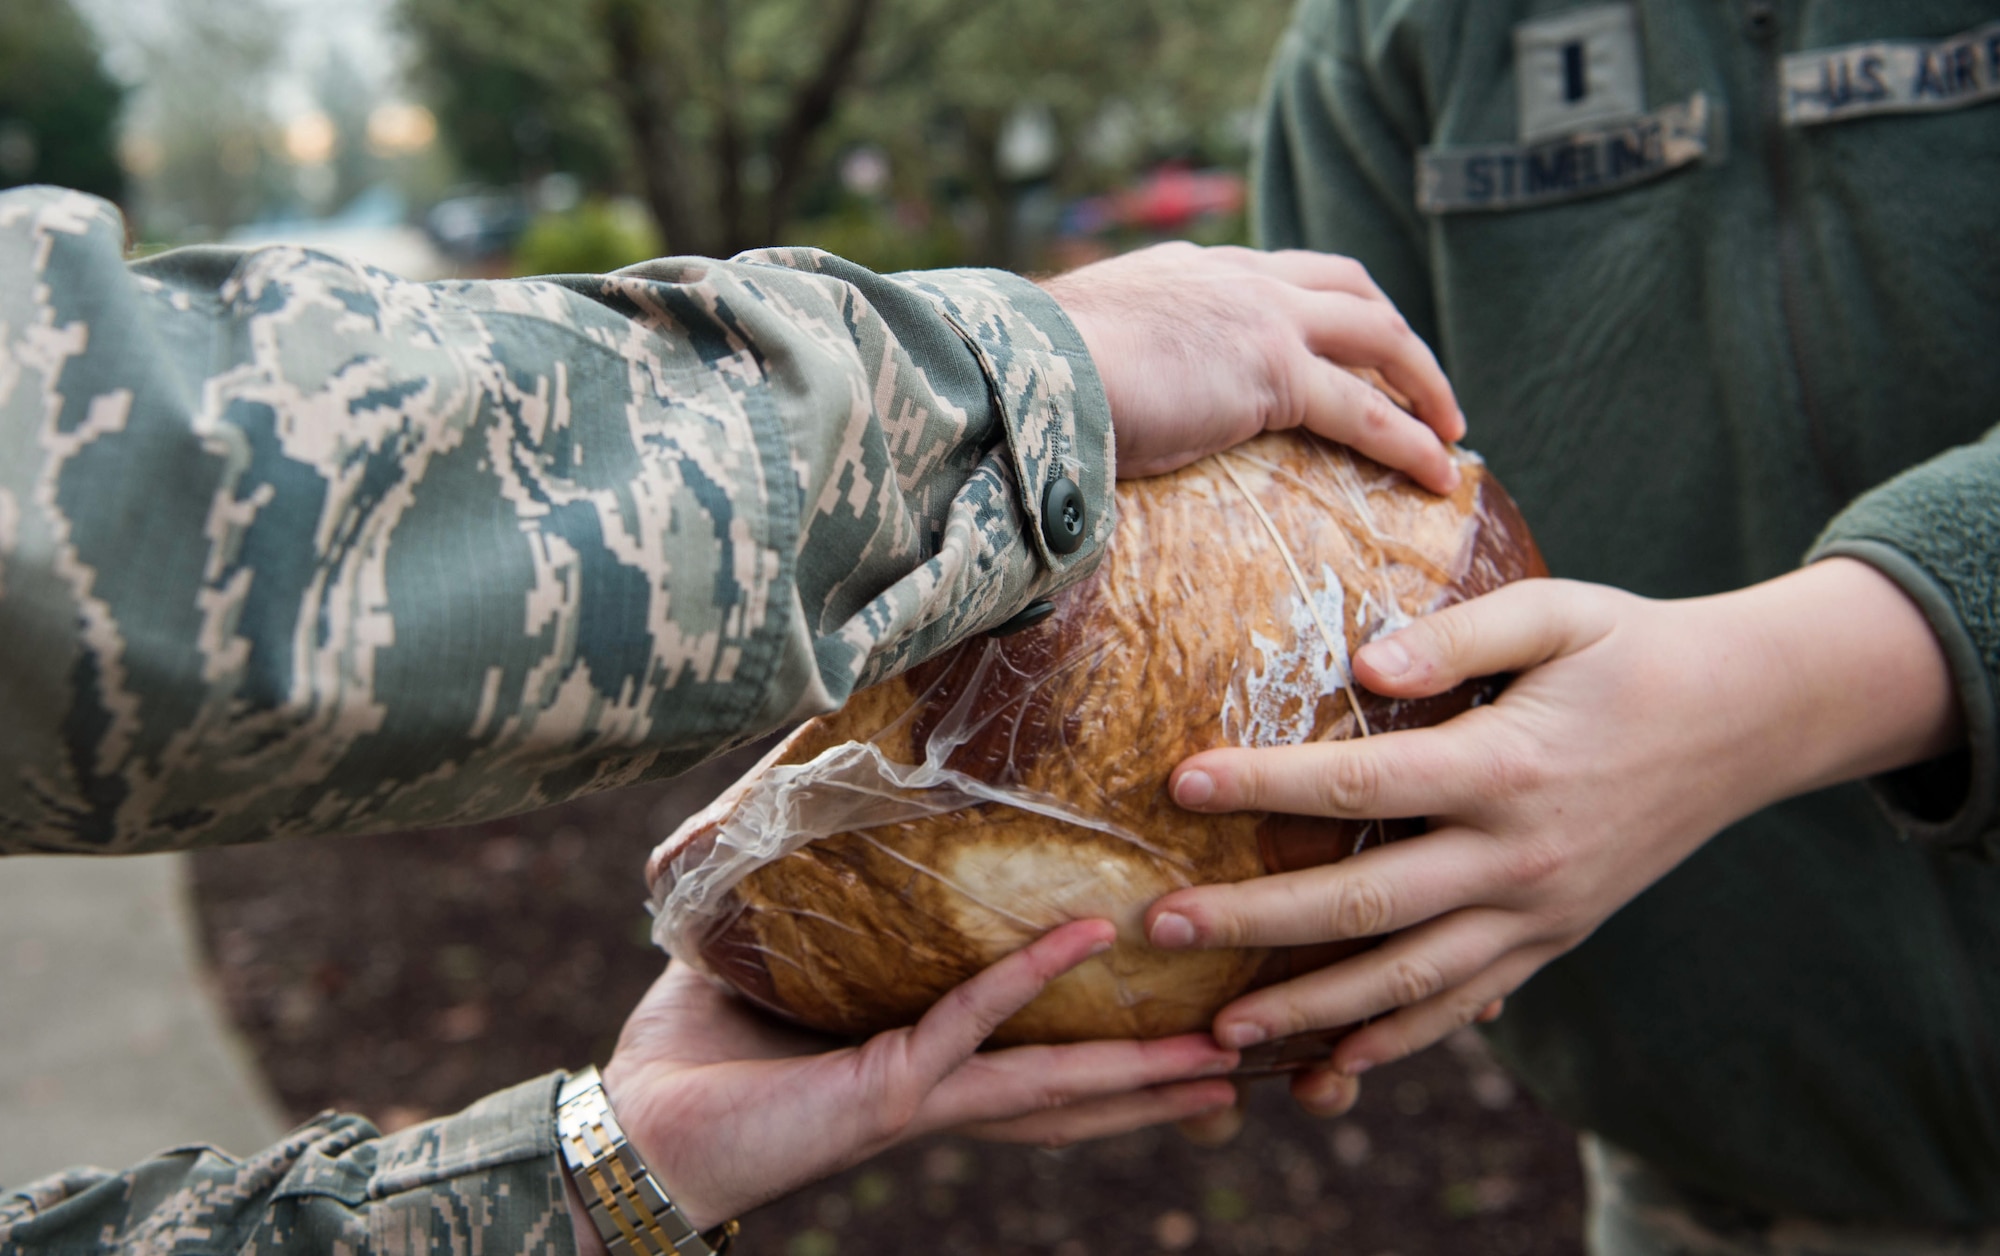 1st Lt. Lindsey Stimeling, 62nd Airlift Wing executive officer, hand a ham to a fellow Airmen during Operation Ham Grenade at Joint Base Lewis-McChord, Wash., Dec. 17, 2019. The Air Force Association McChord Field Chapter and Pierce Military Business Alliance donated the hams for Team McChord Airmen and their families. (U.S. Air Force photo by Senior Airman Tryphena Mayhugh)